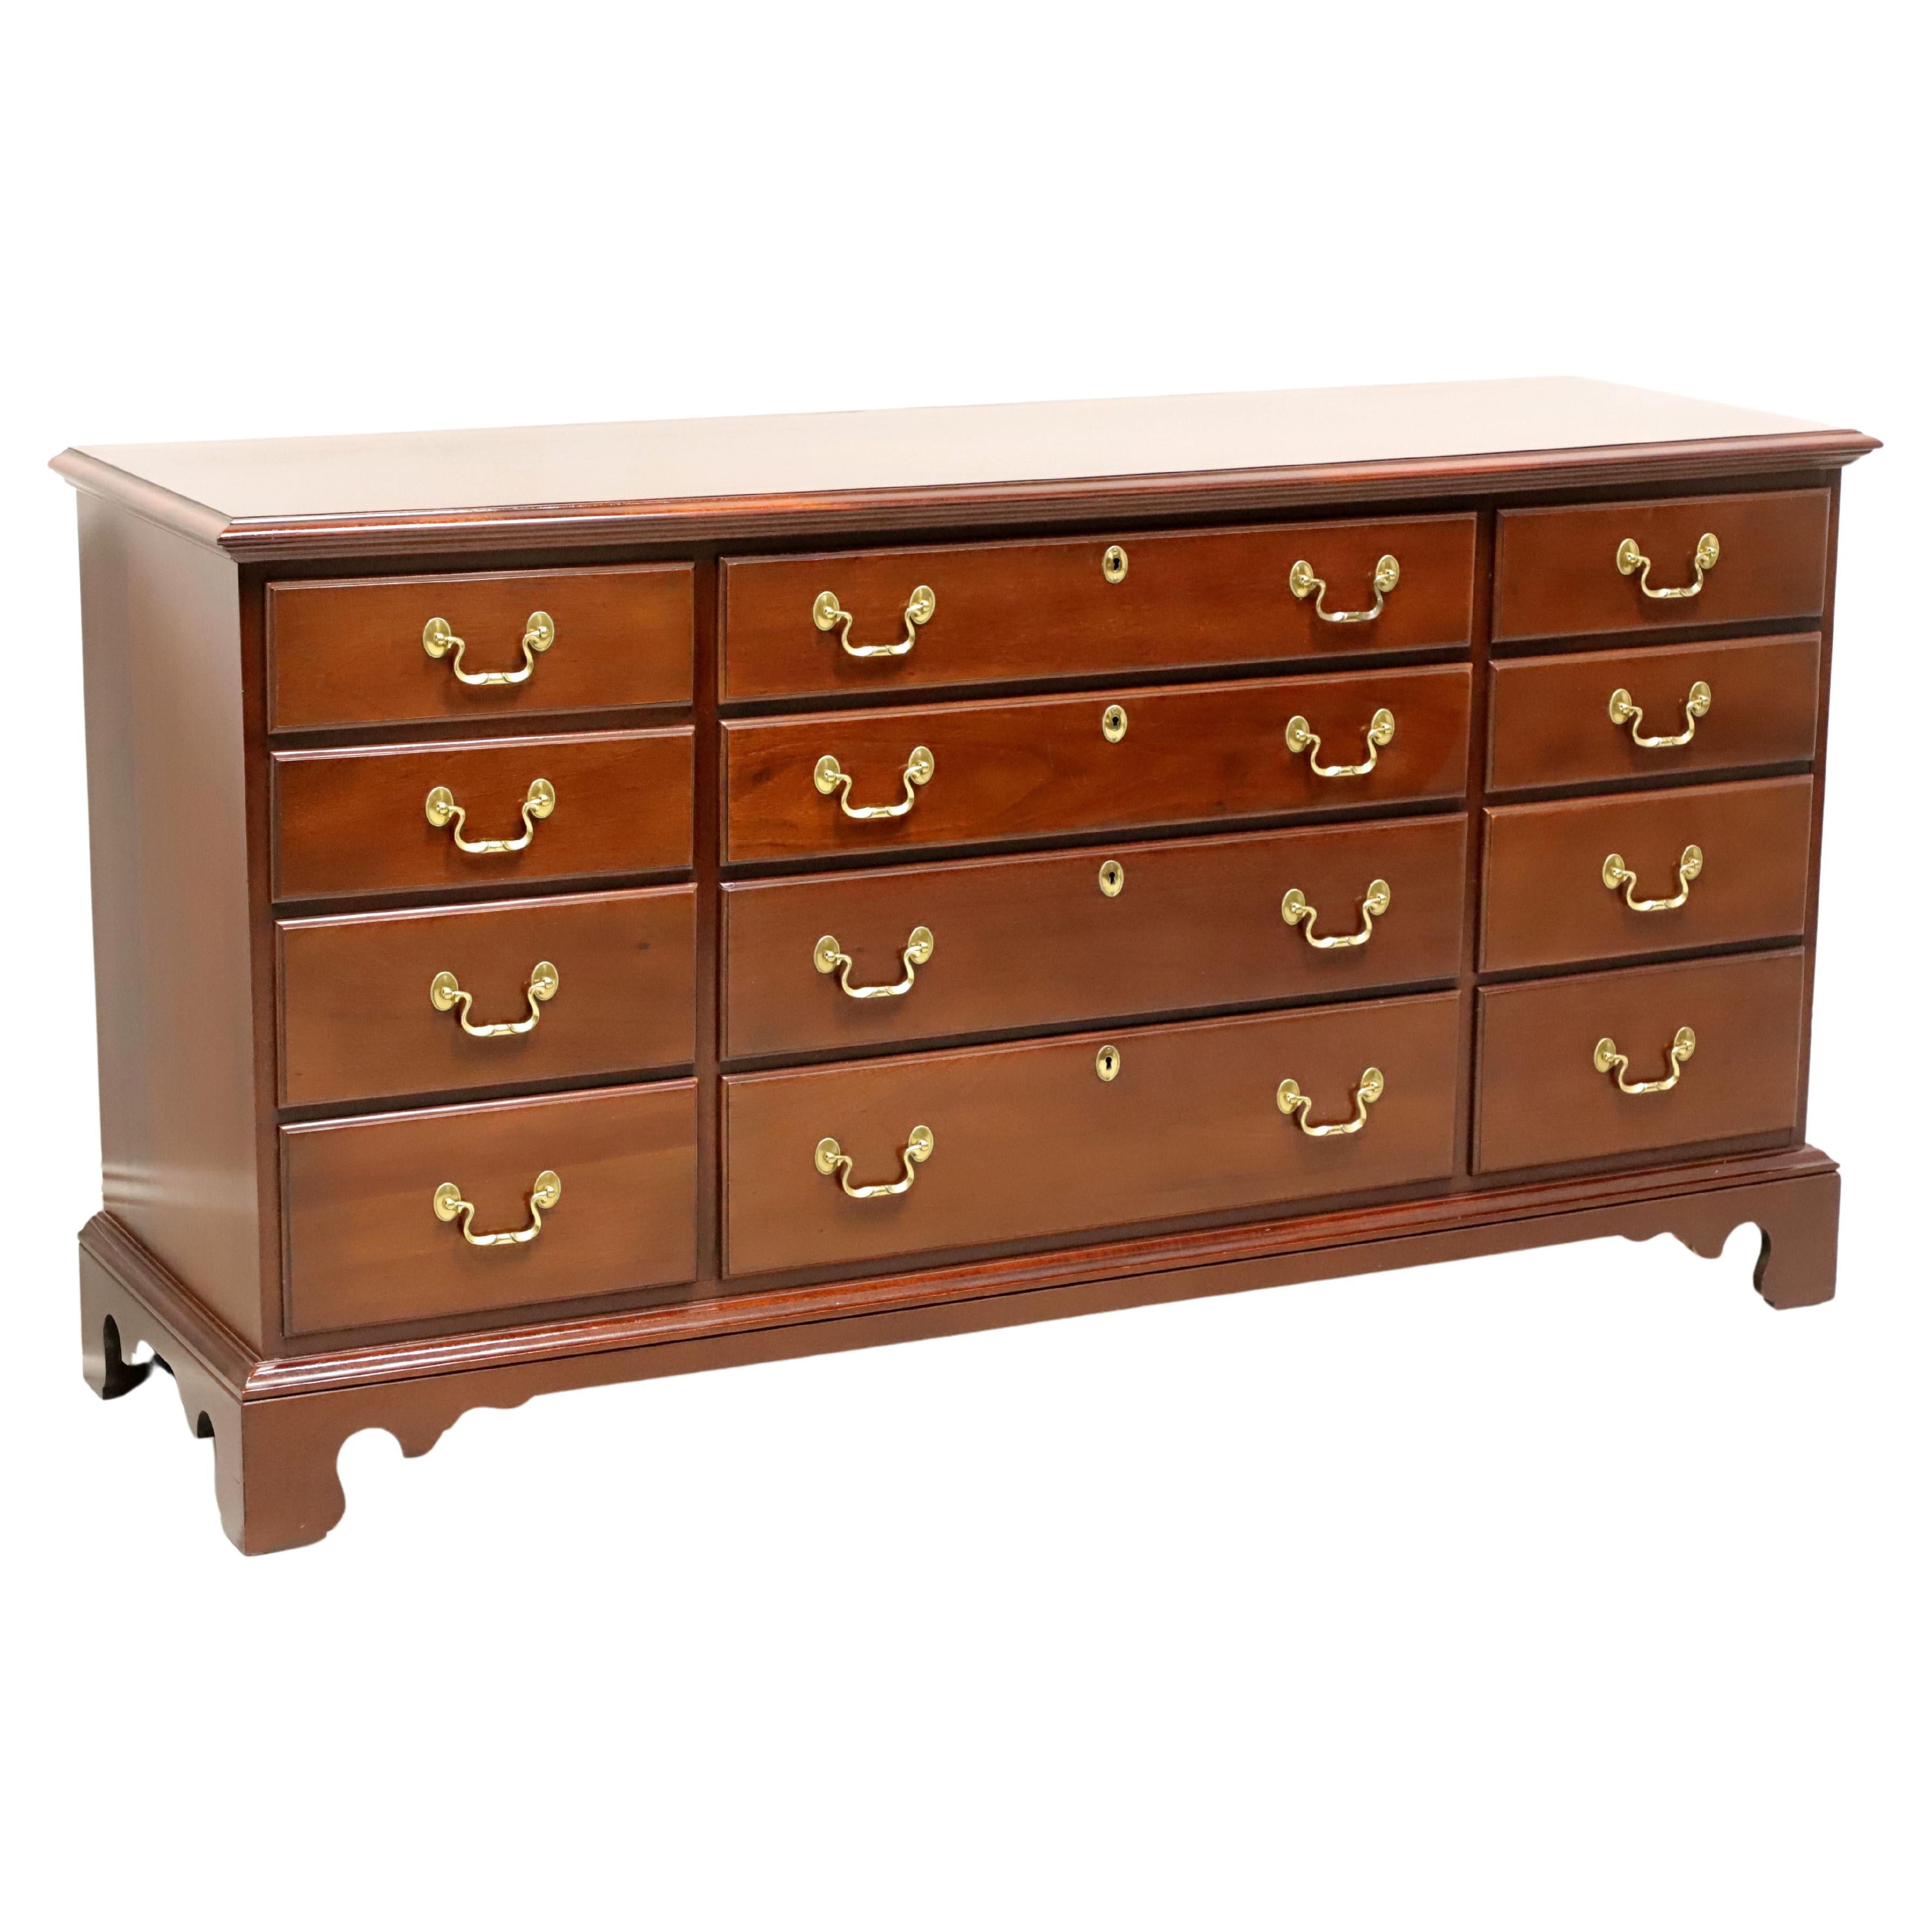 LINK-TAYLOR Heirloom Beaufort Solid Mahogany Chippendale Triple Dresser - A